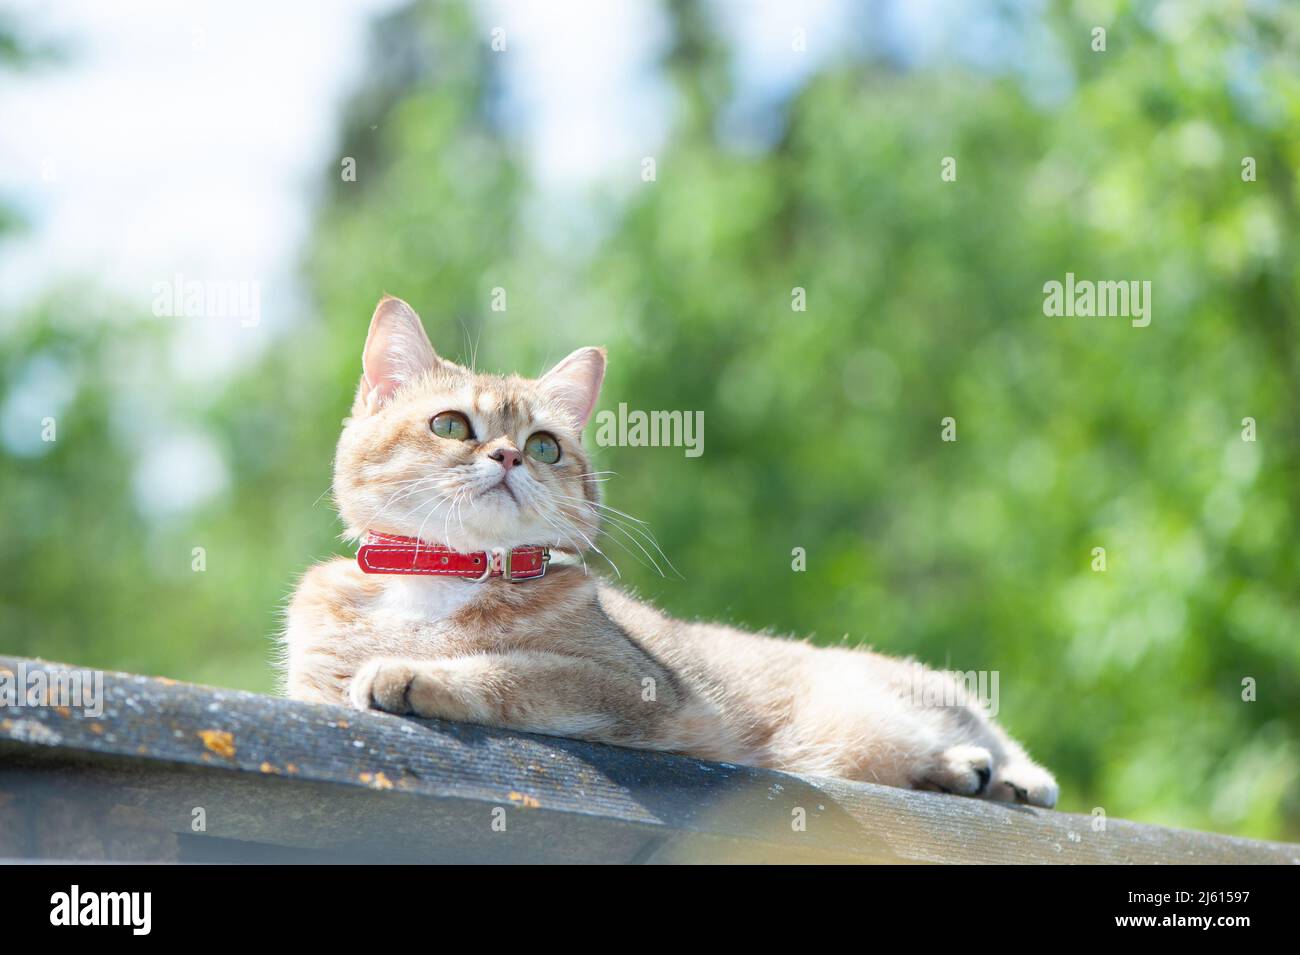 British female cat of golden chinchilla color lies on the roof against the blue sky and greenery Stock Photo